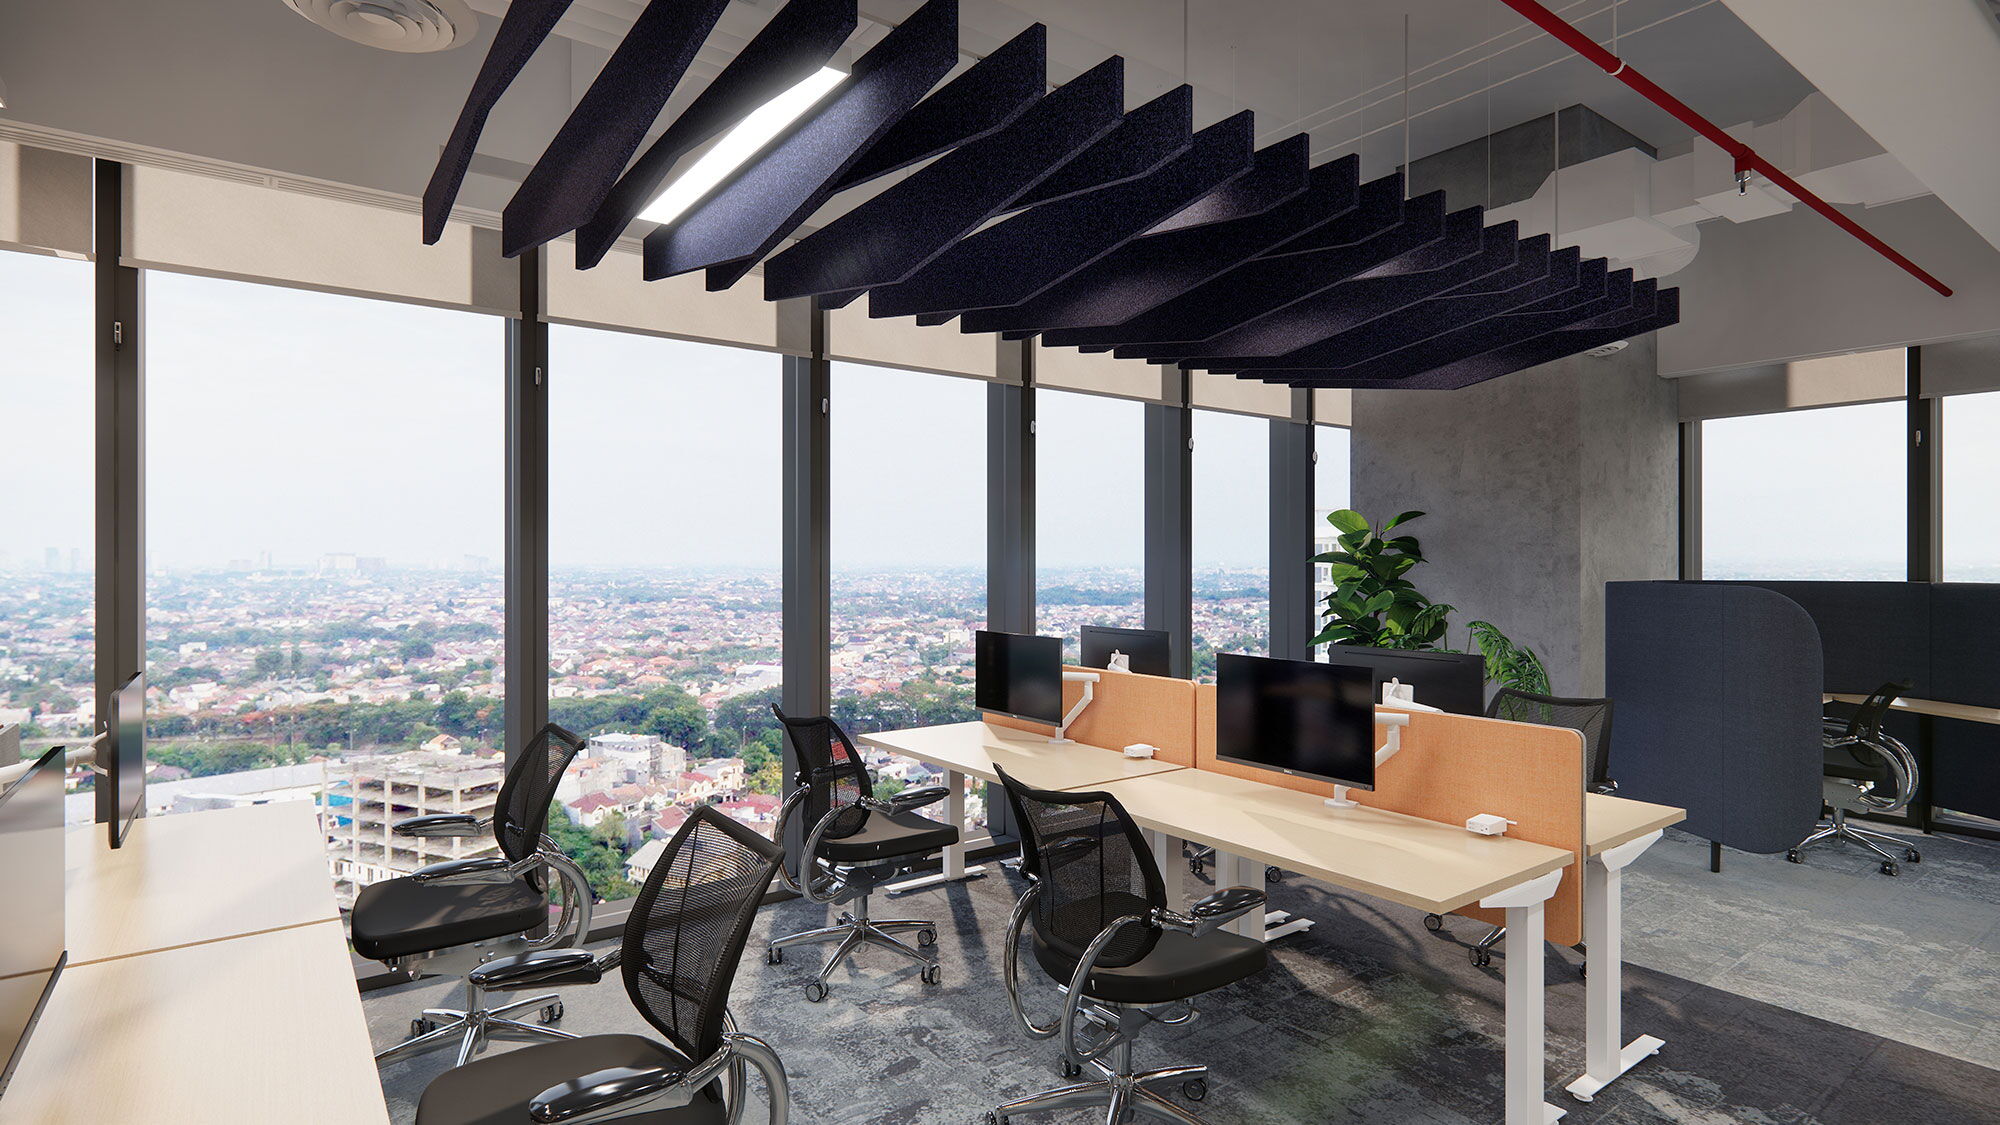 Ecocore Baffles in office highrise